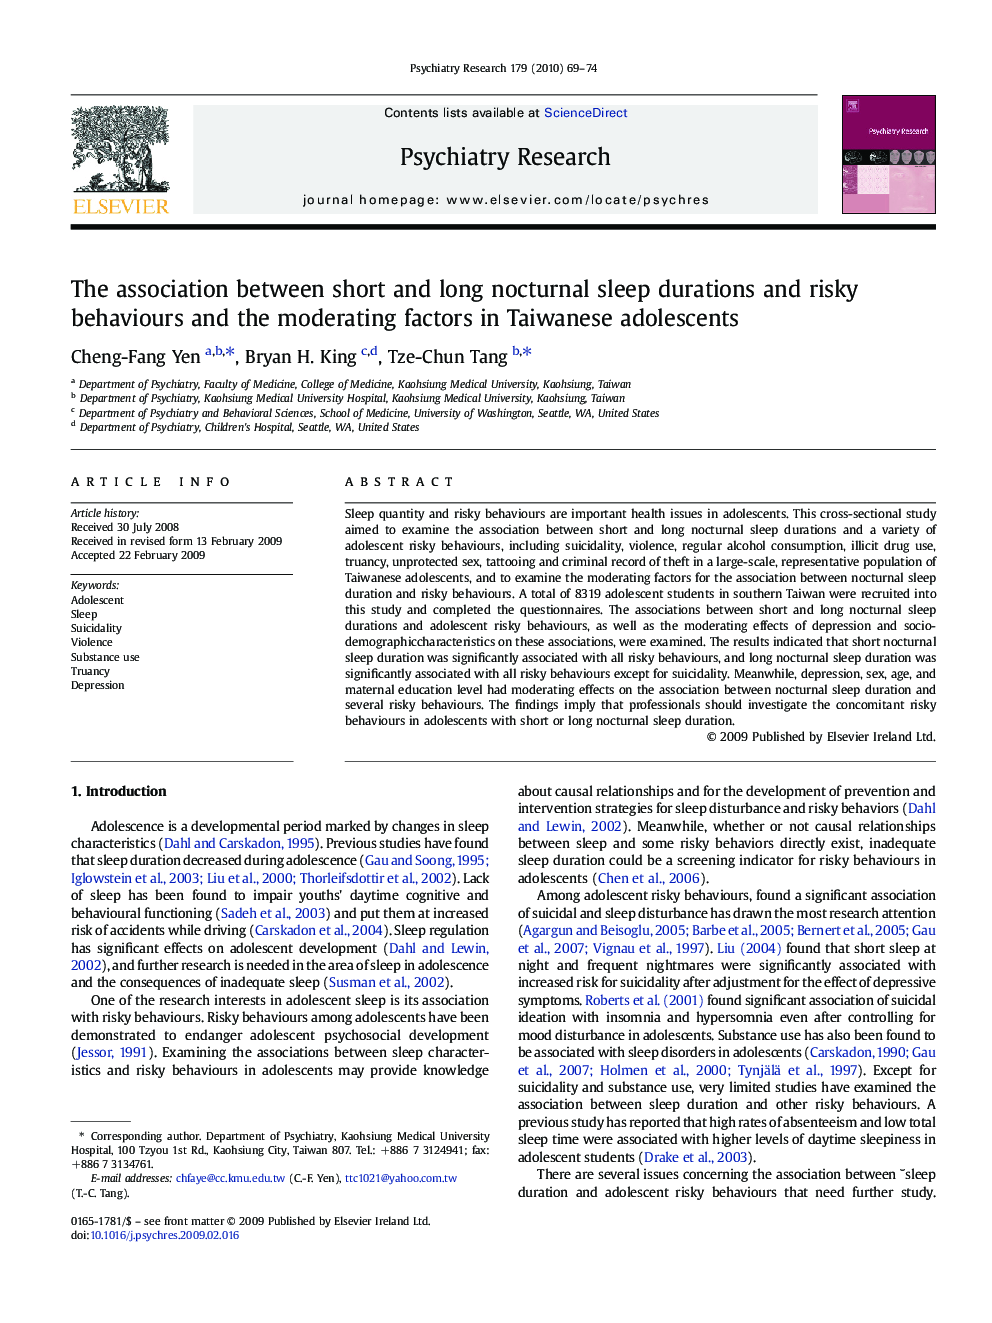 The association between short and long nocturnal sleep durations and risky behaviours and the moderating factors in Taiwanese adolescents